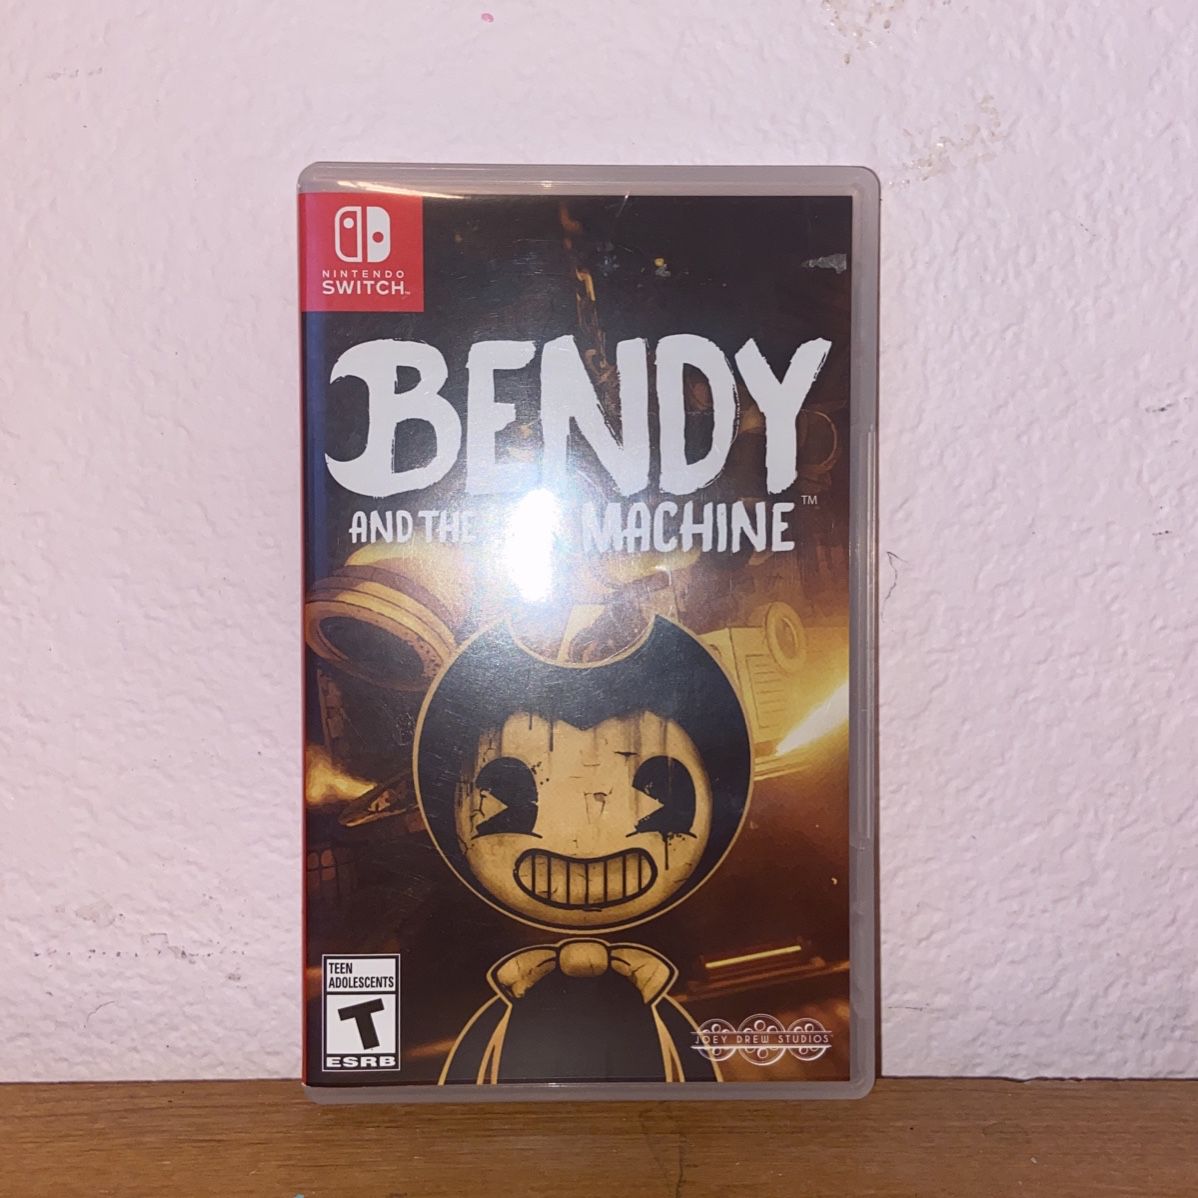 Bendy and the Ink Machine - Nintendo Switch